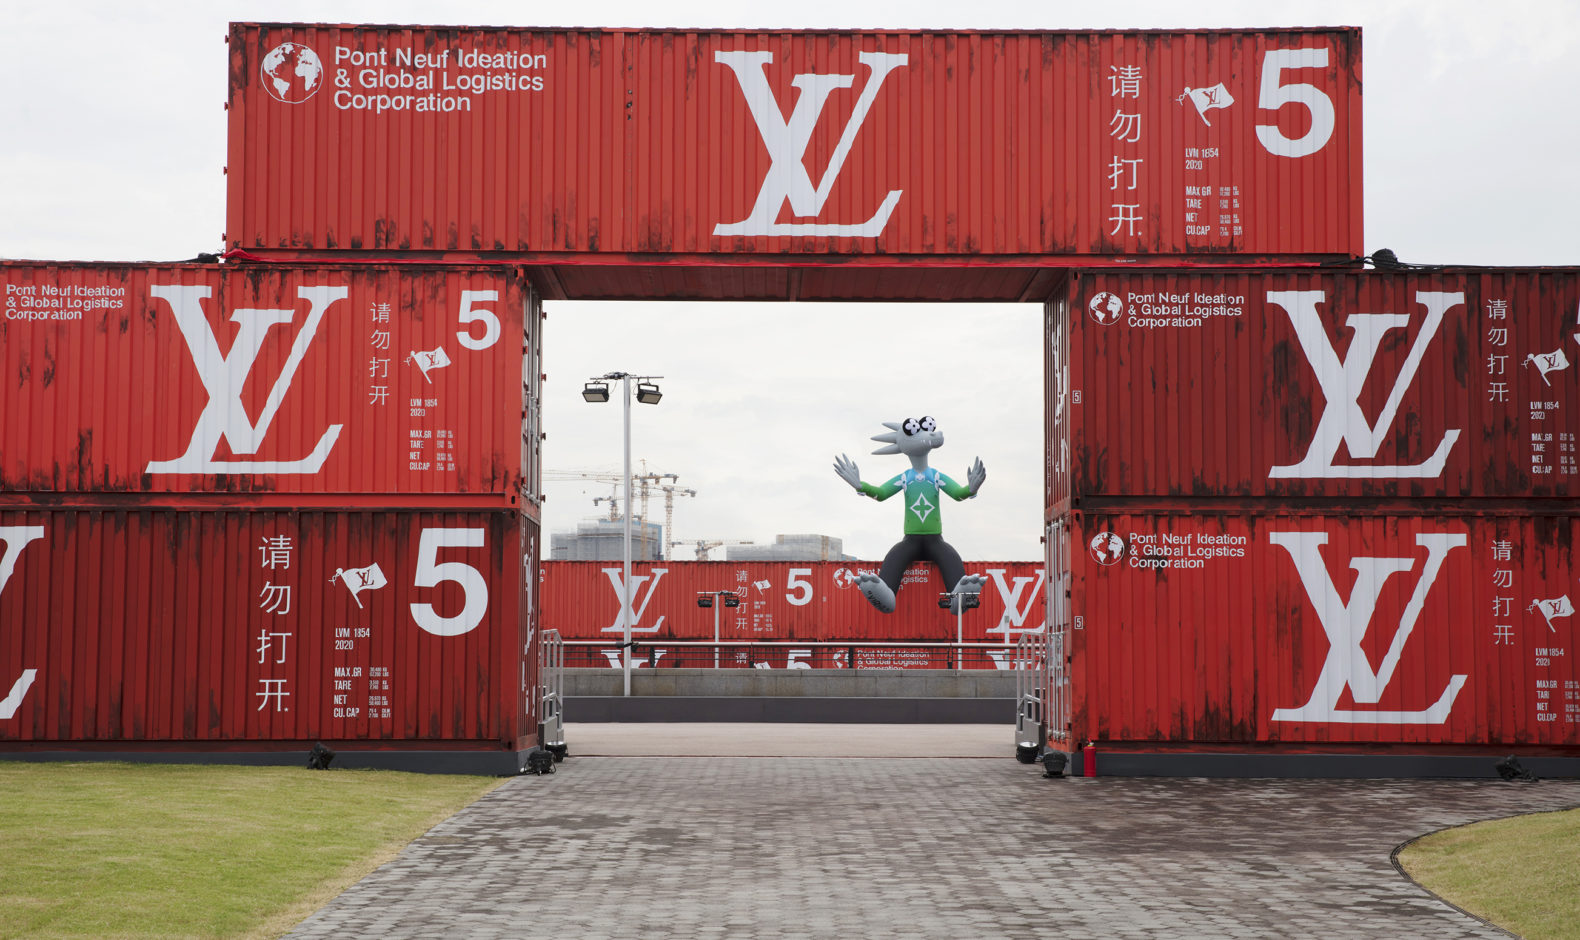 Louis Vuitton on X: #LVMenSS21 Miniature shipping containers serve as the  invitation for @virgilabloh's upcoming #LouisVuitton show, referencing the  collection's international voyage from Paris to Shanghai. Watch the show on  Thursday, August